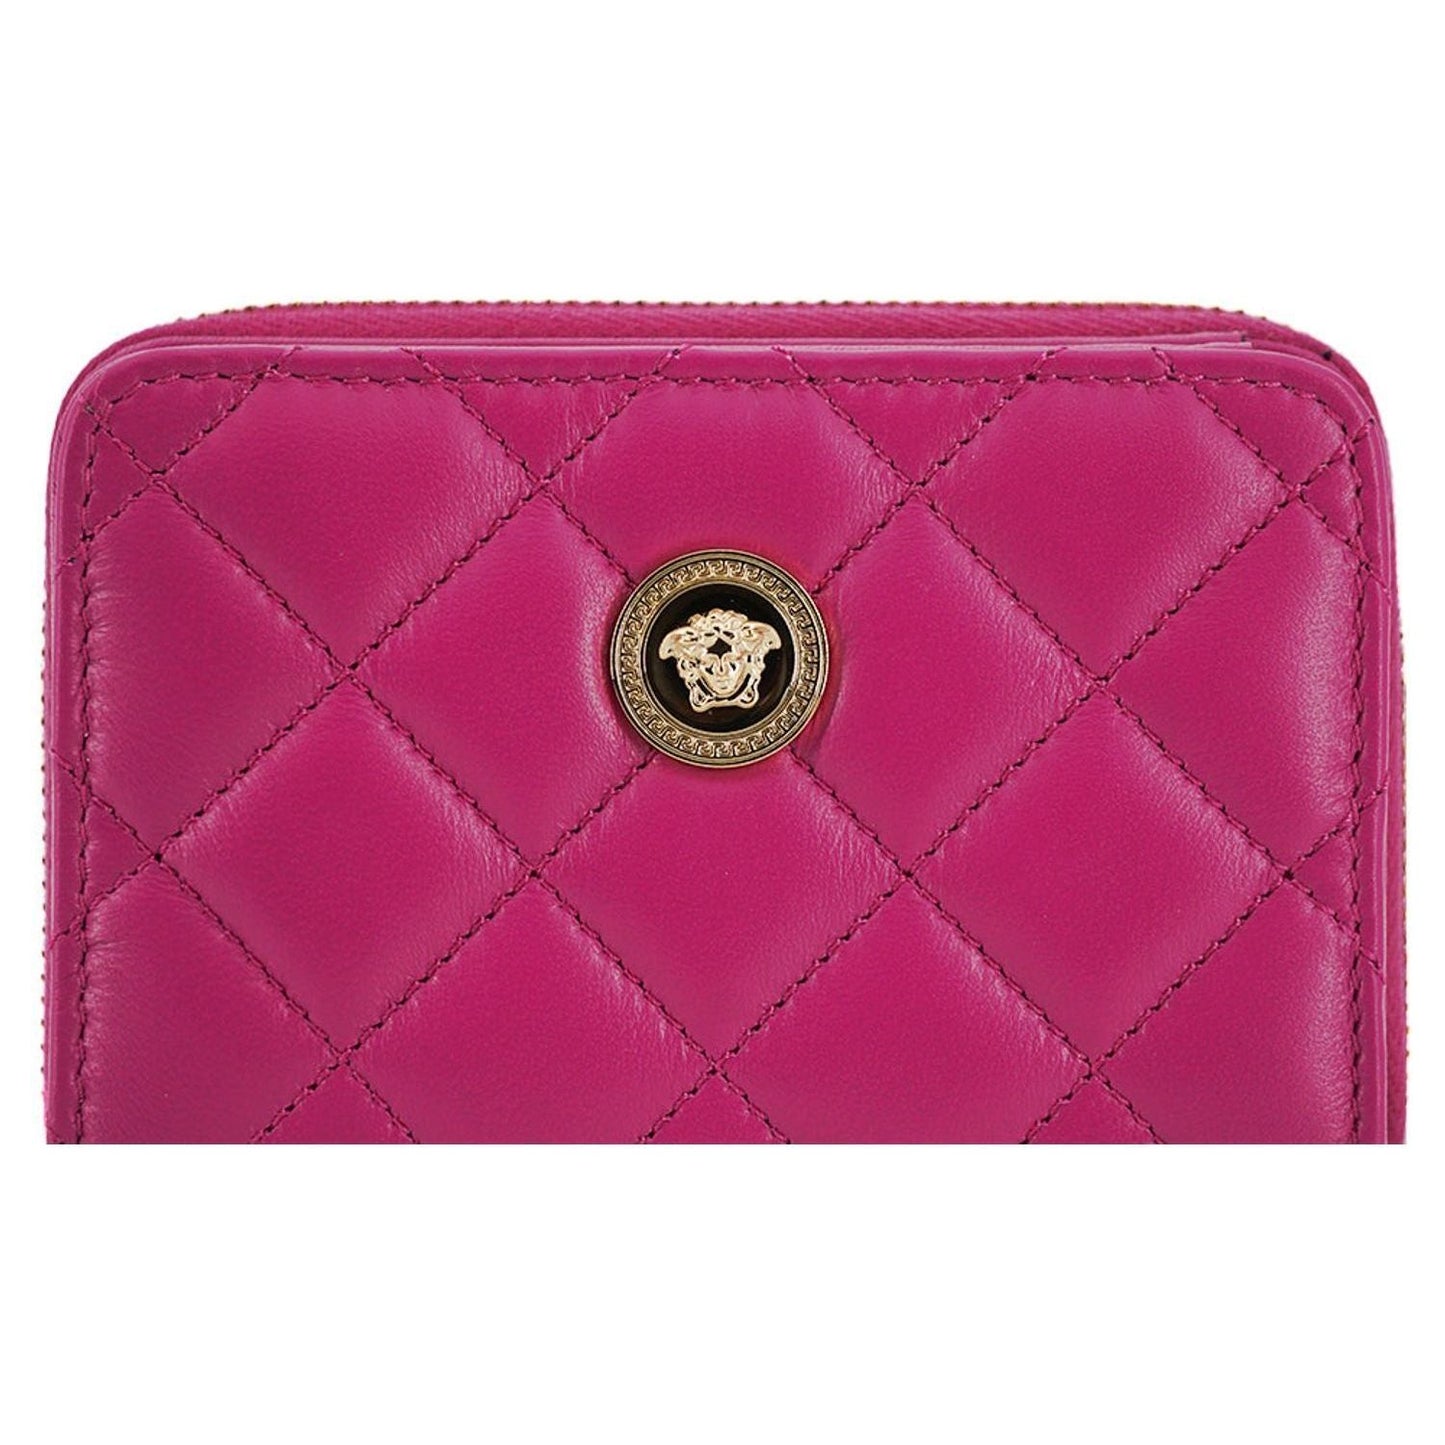 Versace Elegant Purple Quilted Leather Wallet WOMAN WALLETS purple-nappa-leather-bifold-zip-around-wallet